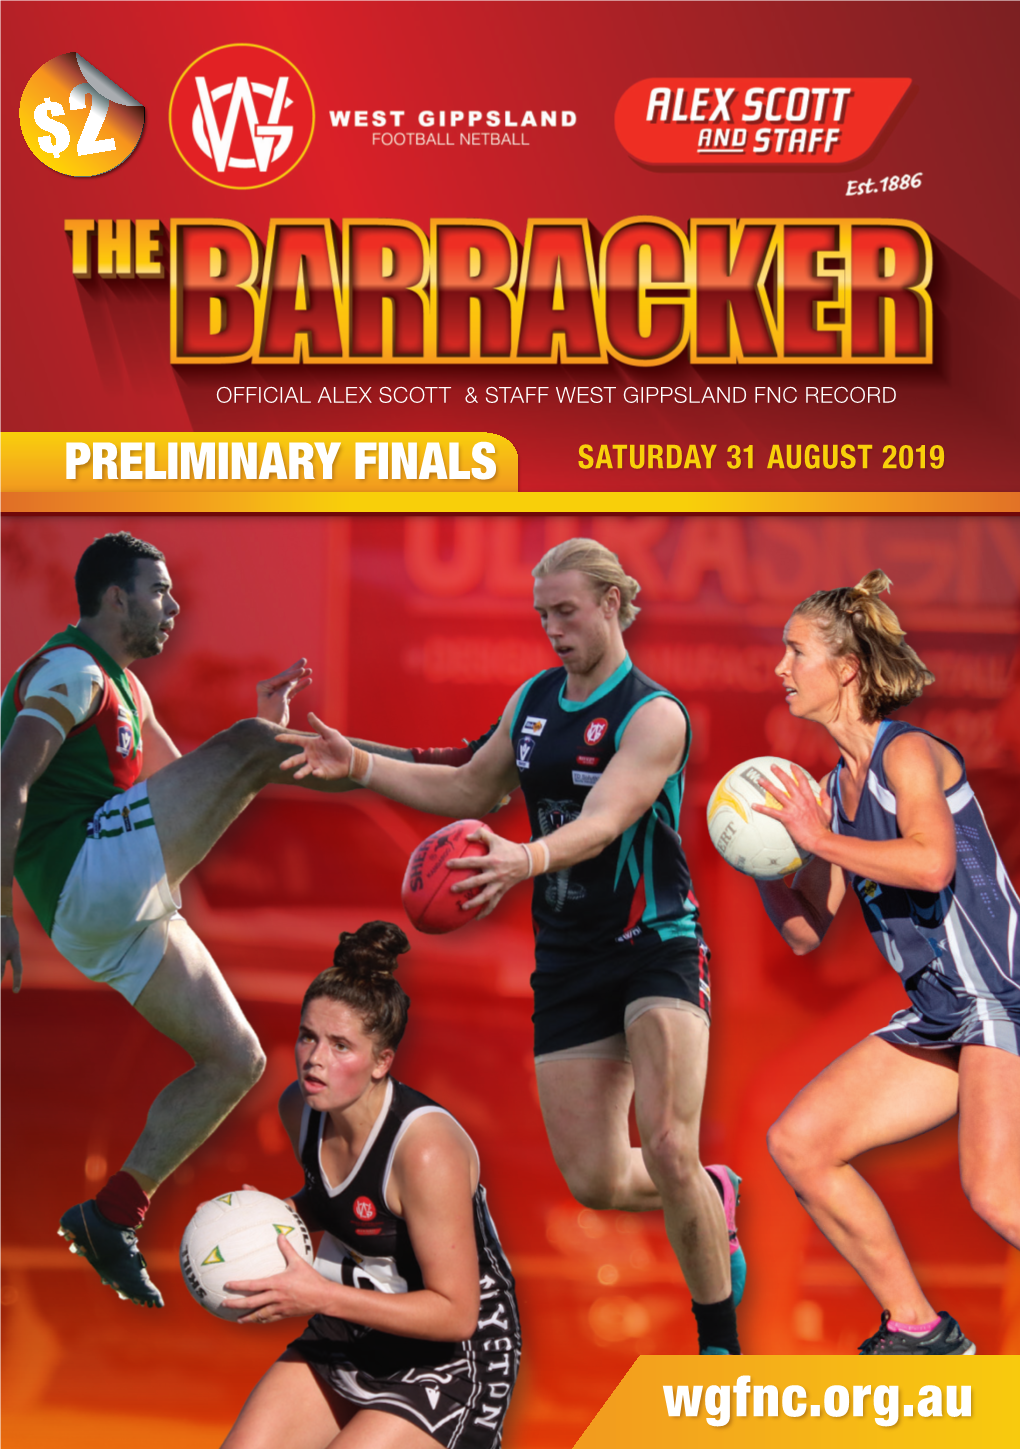 Football Netball Competition in 2019 and Beyond, Because We Know Local Teams and Team Support Make Our Local Communities Even Better